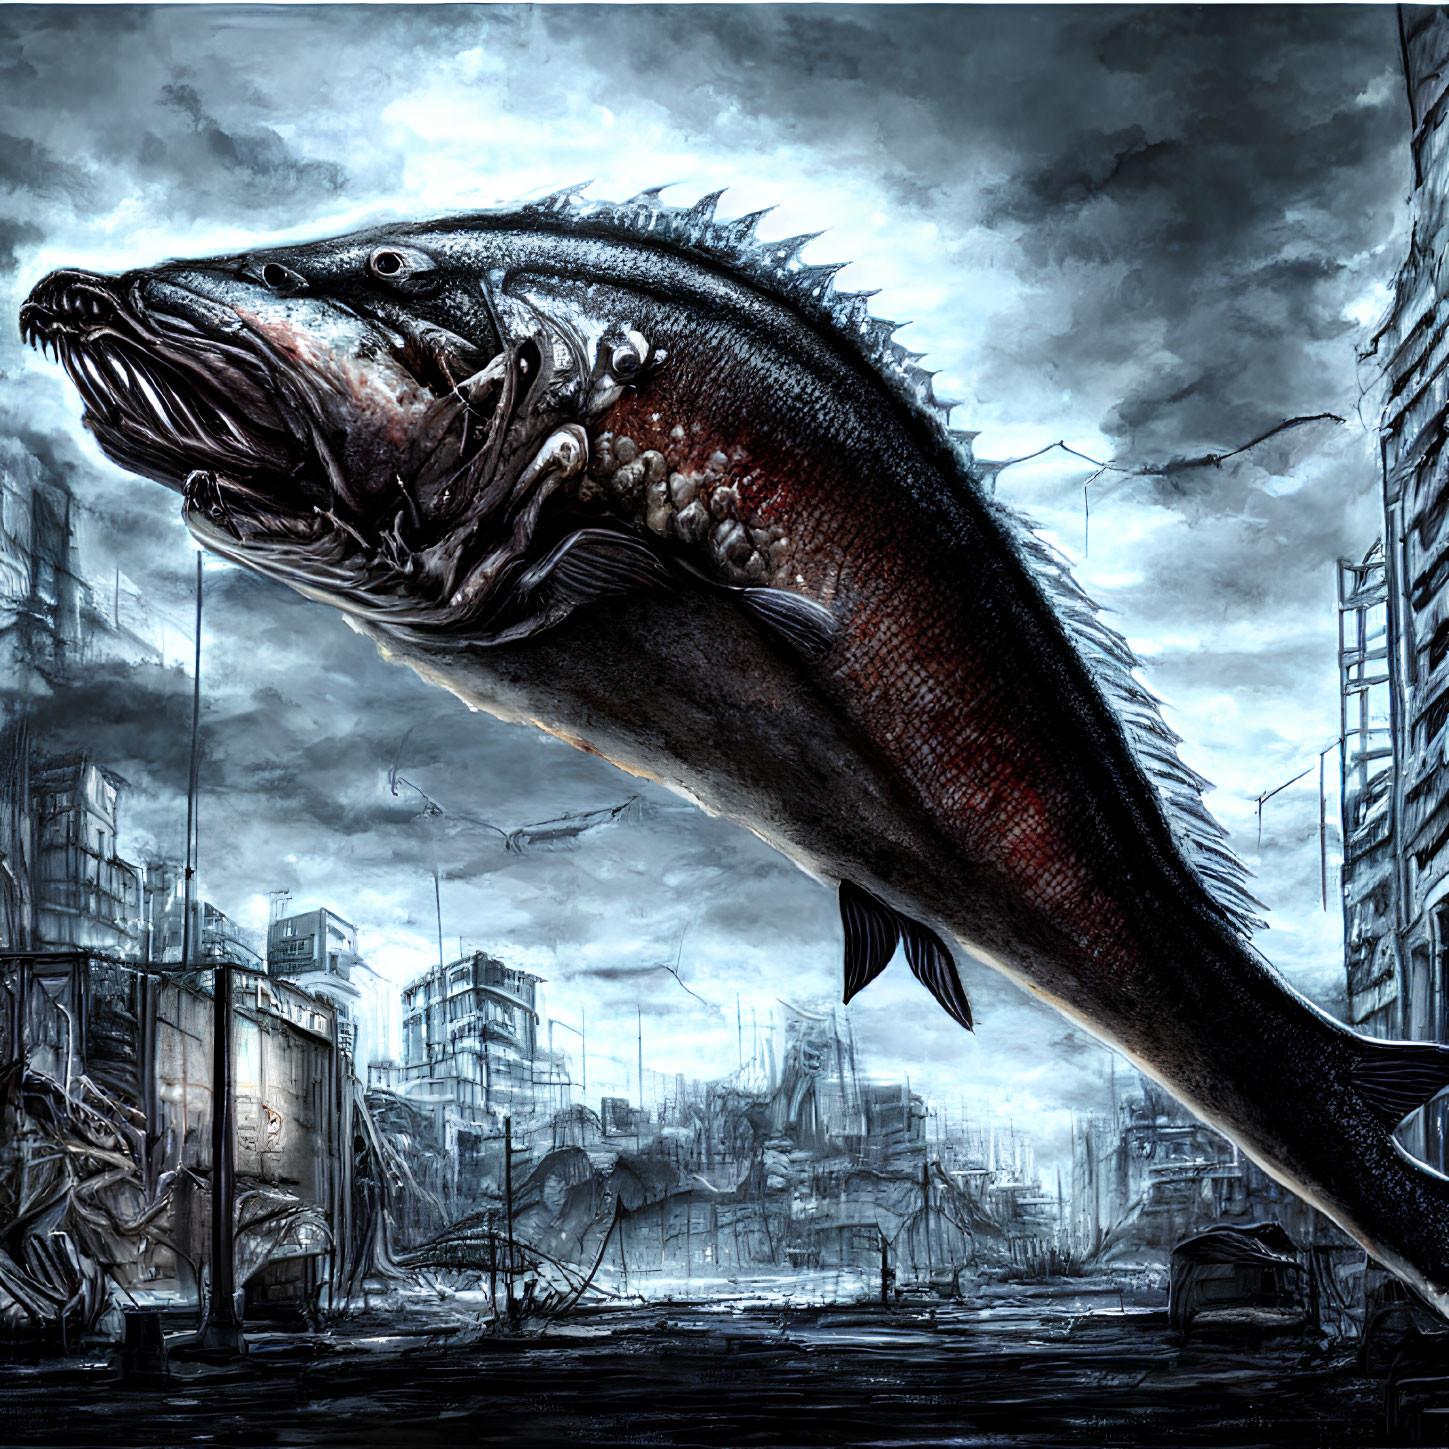 Giant fish with sharp teeth in post-apocalyptic cityscape under stormy sky